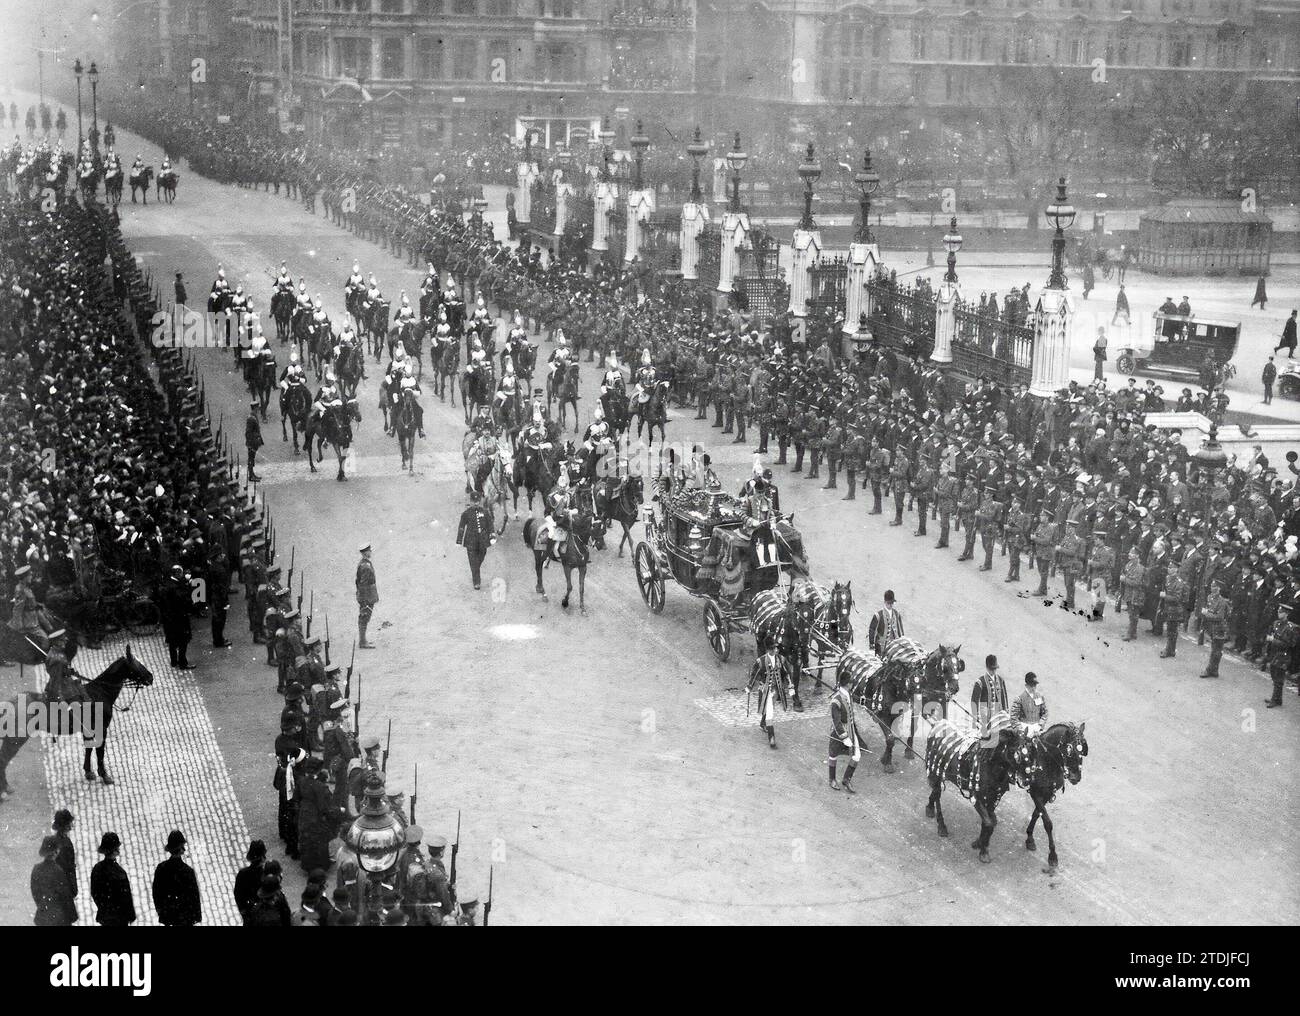 11/01/1914. Opening of the English parliament. King George V's Carriage Addressing the Camera on the Reopening. Credit: Album / Archivo ABC Stock Photo